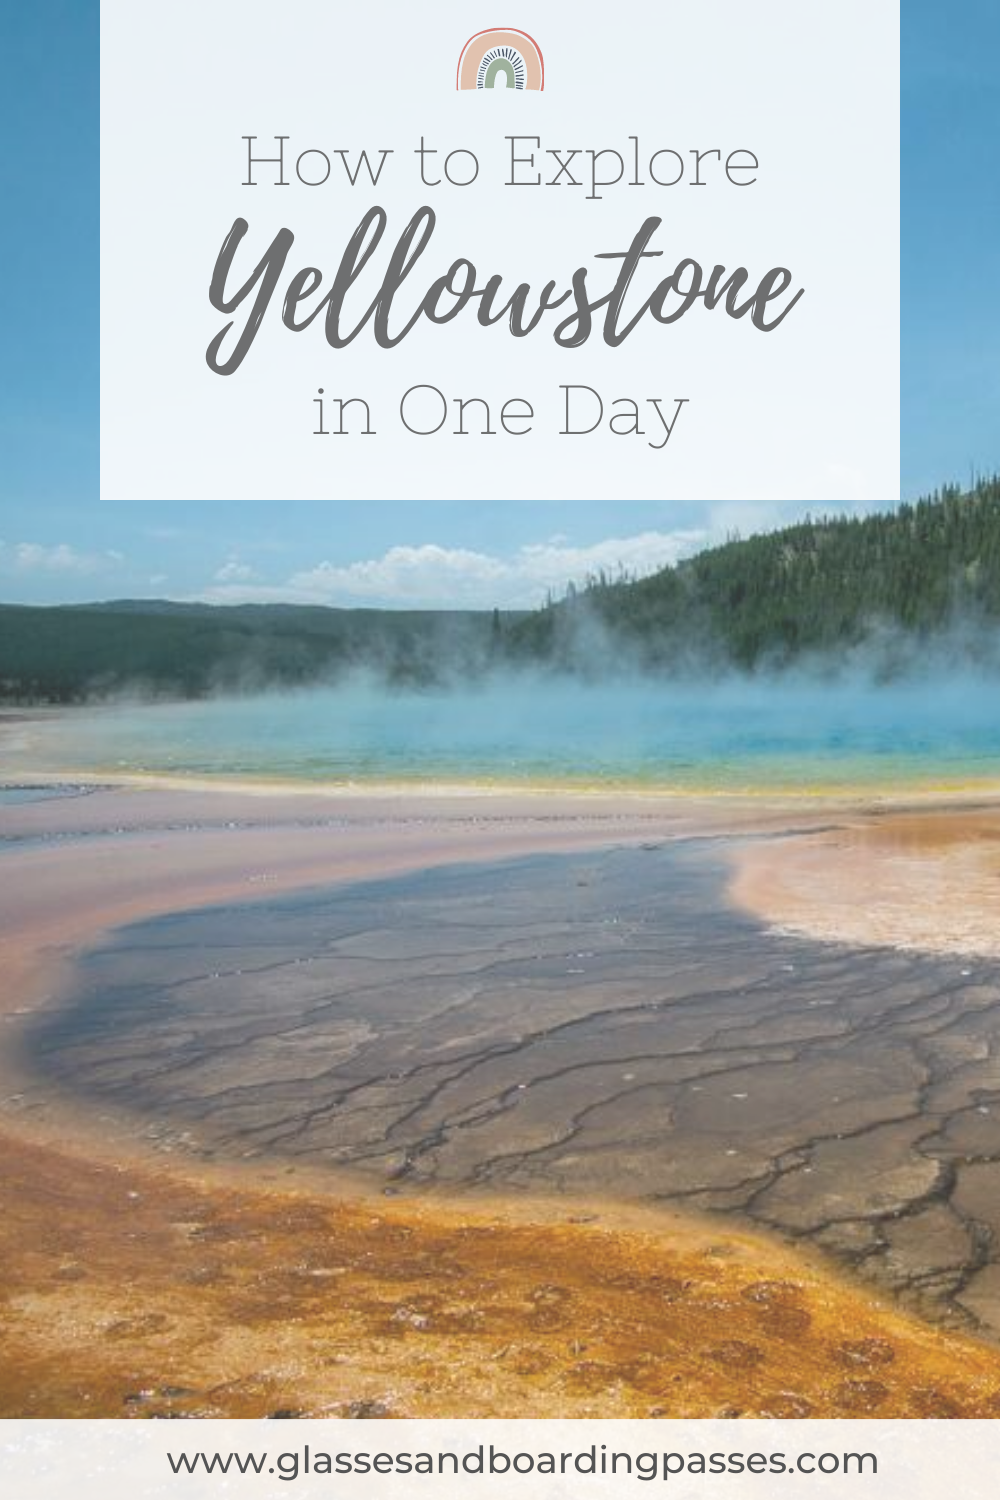 How to Explore Yellowstone in One Day